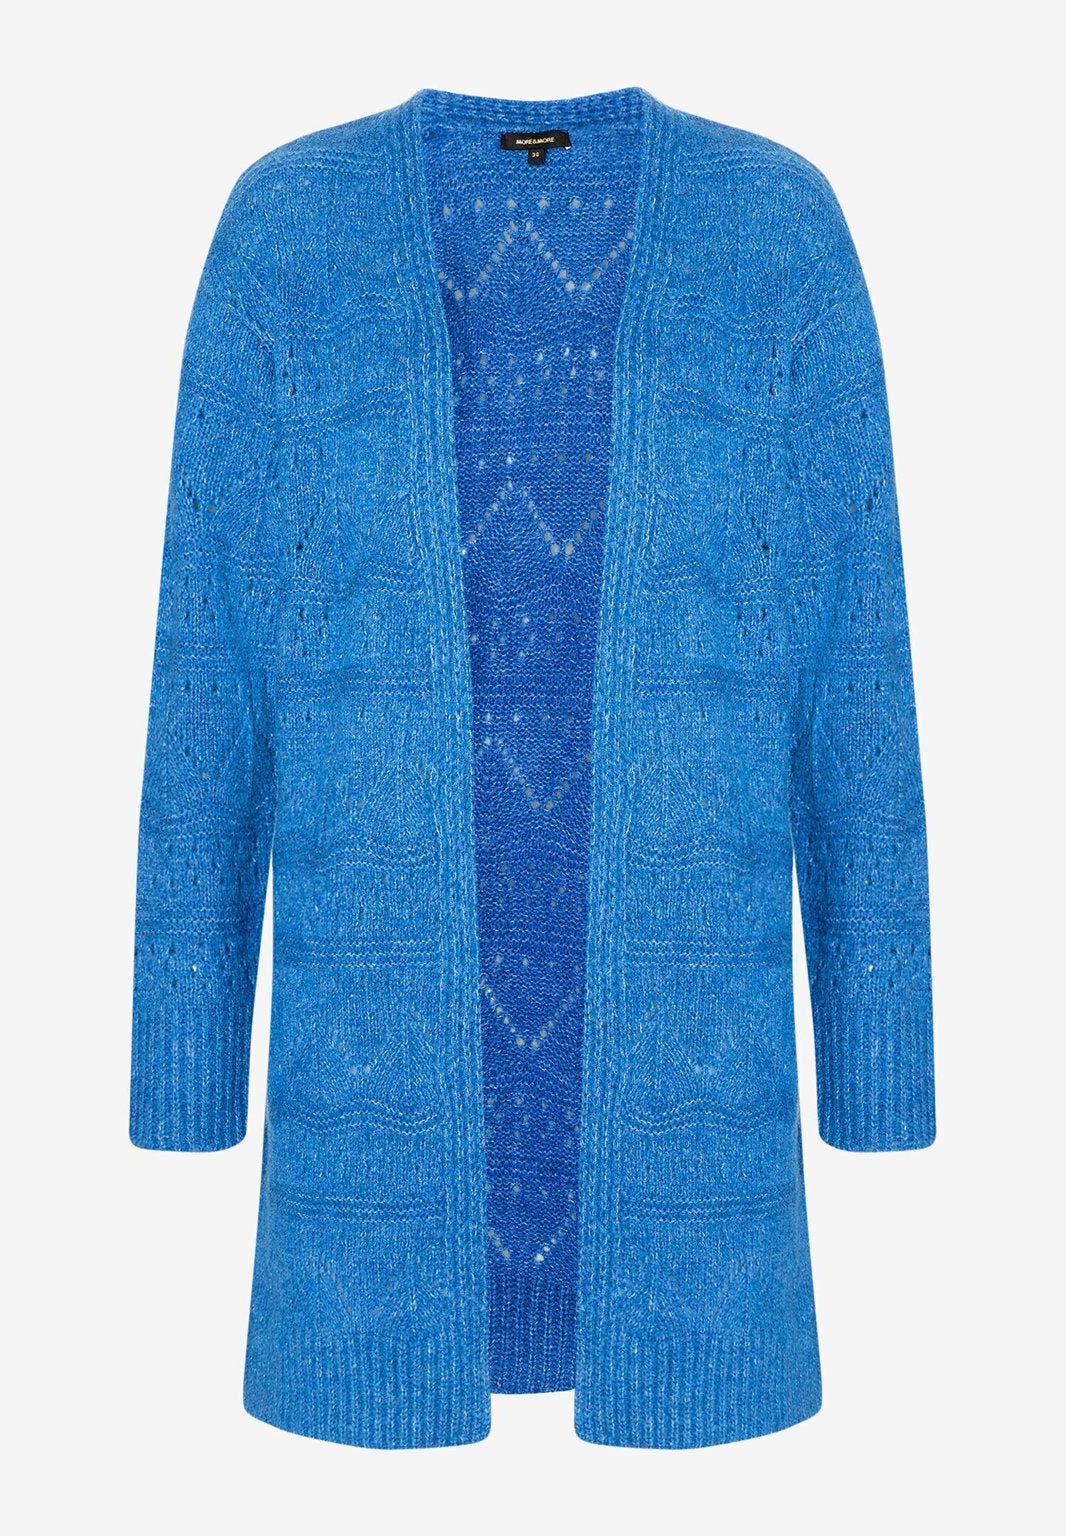 Blue Cardigan With Openwork Pattern_31111200_0338_04